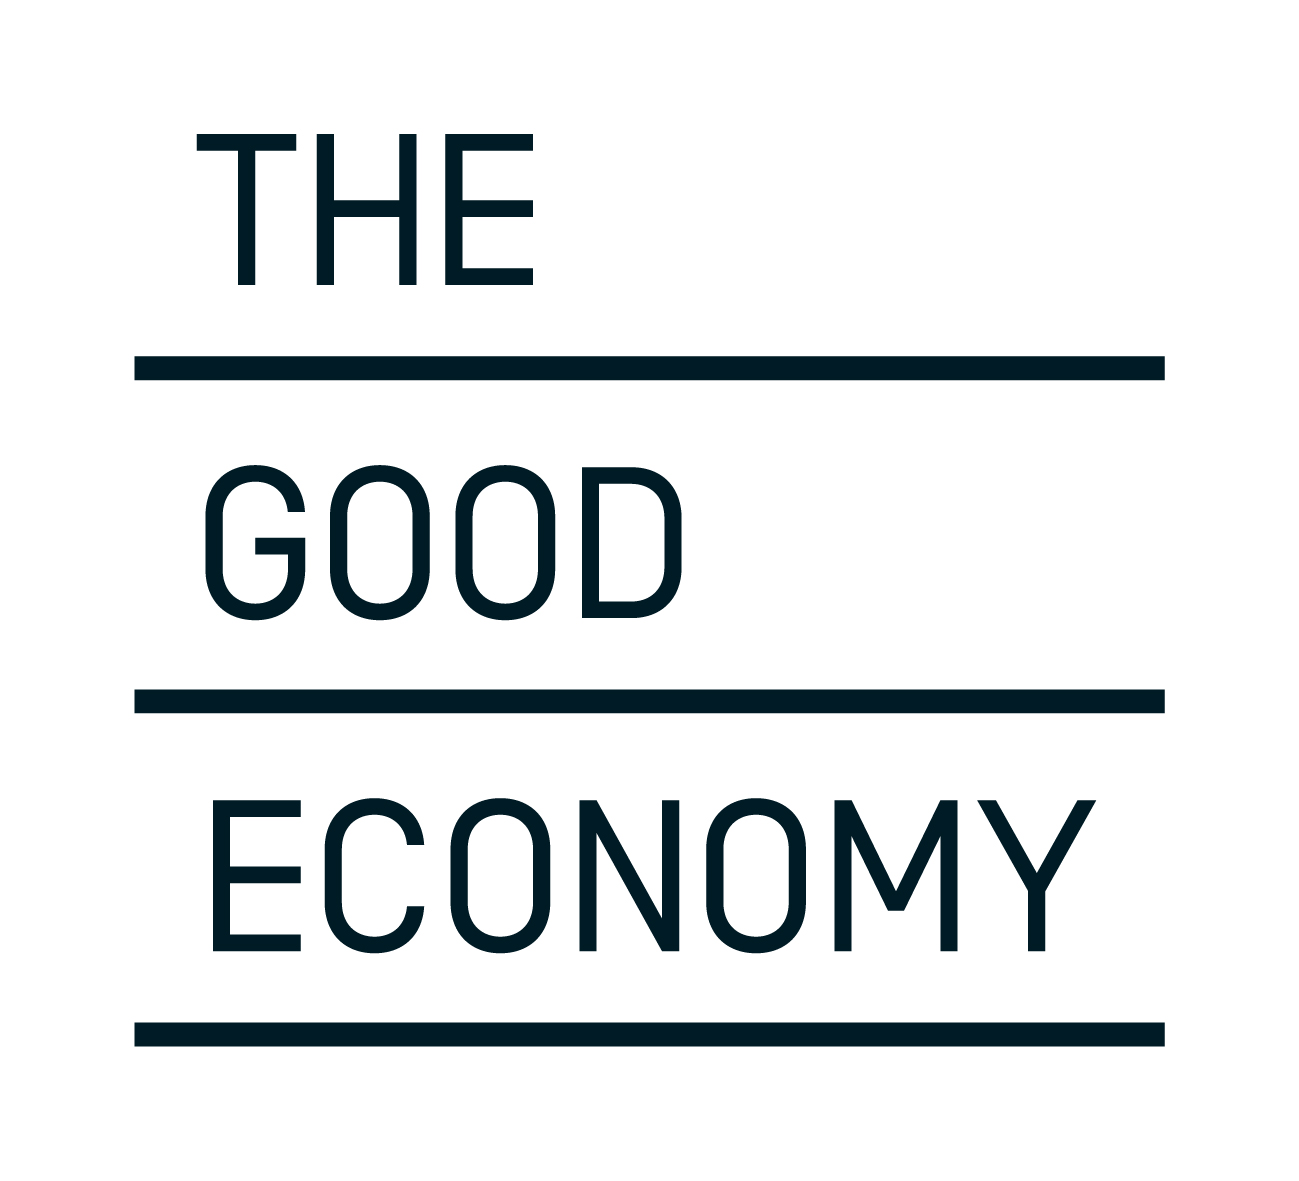 The Good Economy logo - if you click on this link it opens email client to mike@thegoodeconomy.co.uk